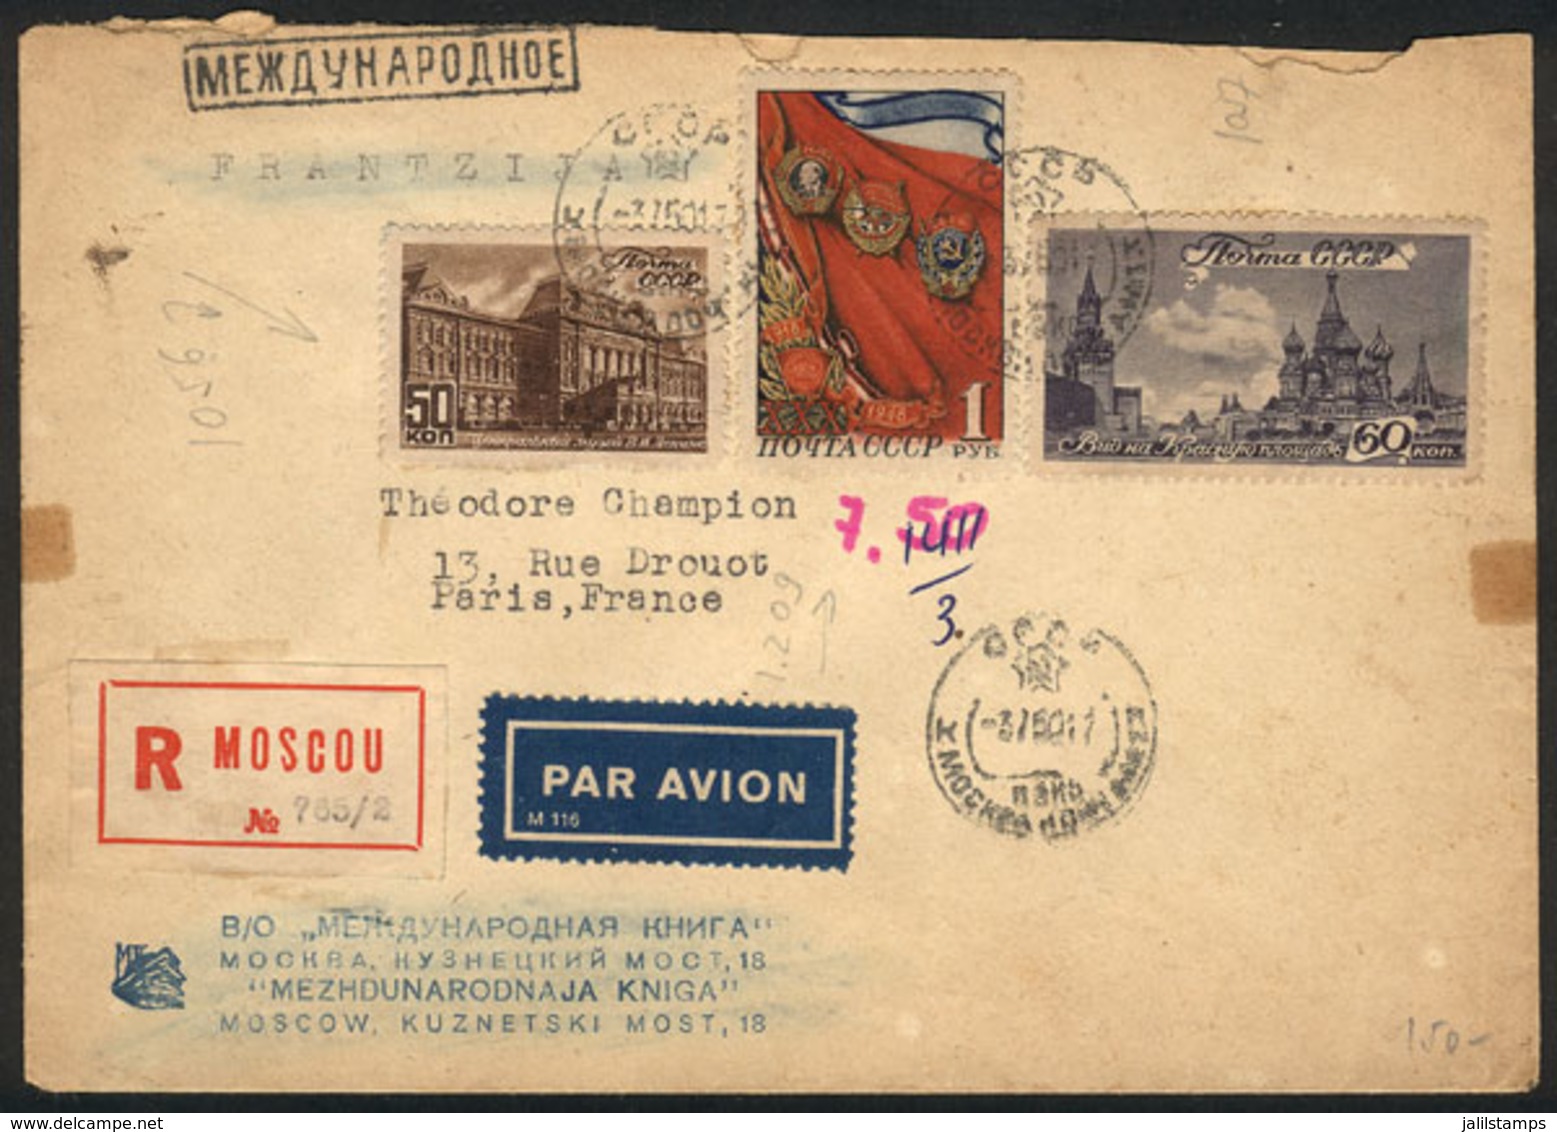 RUSSIA: Registered Cover Sent From Moscow To Paris, Nice Postage! - Briefe U. Dokumente